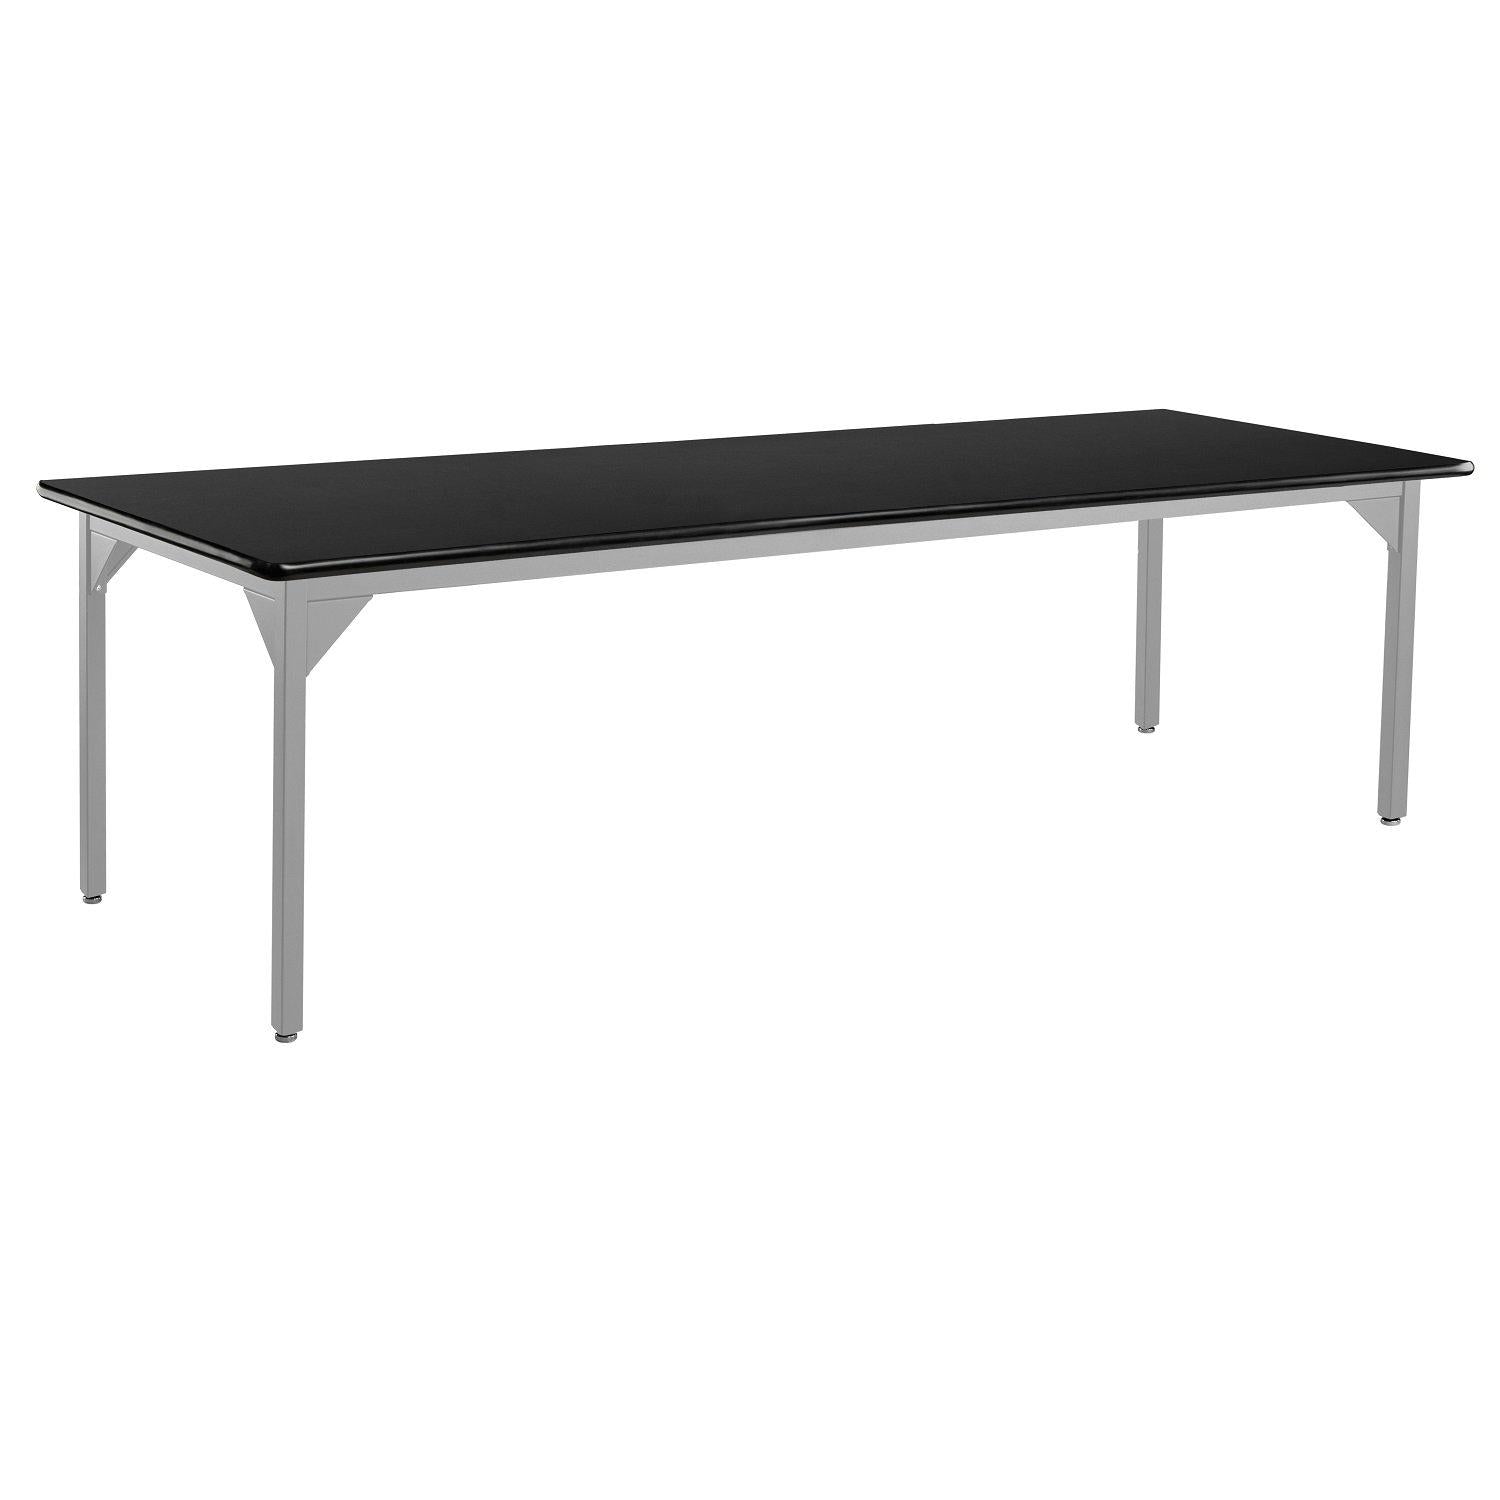 Heavy-Duty Fixed Height Utility Table, Soft Grey Frame, 36" x 84", High-Pressure Laminate Top with T-Mold Edge